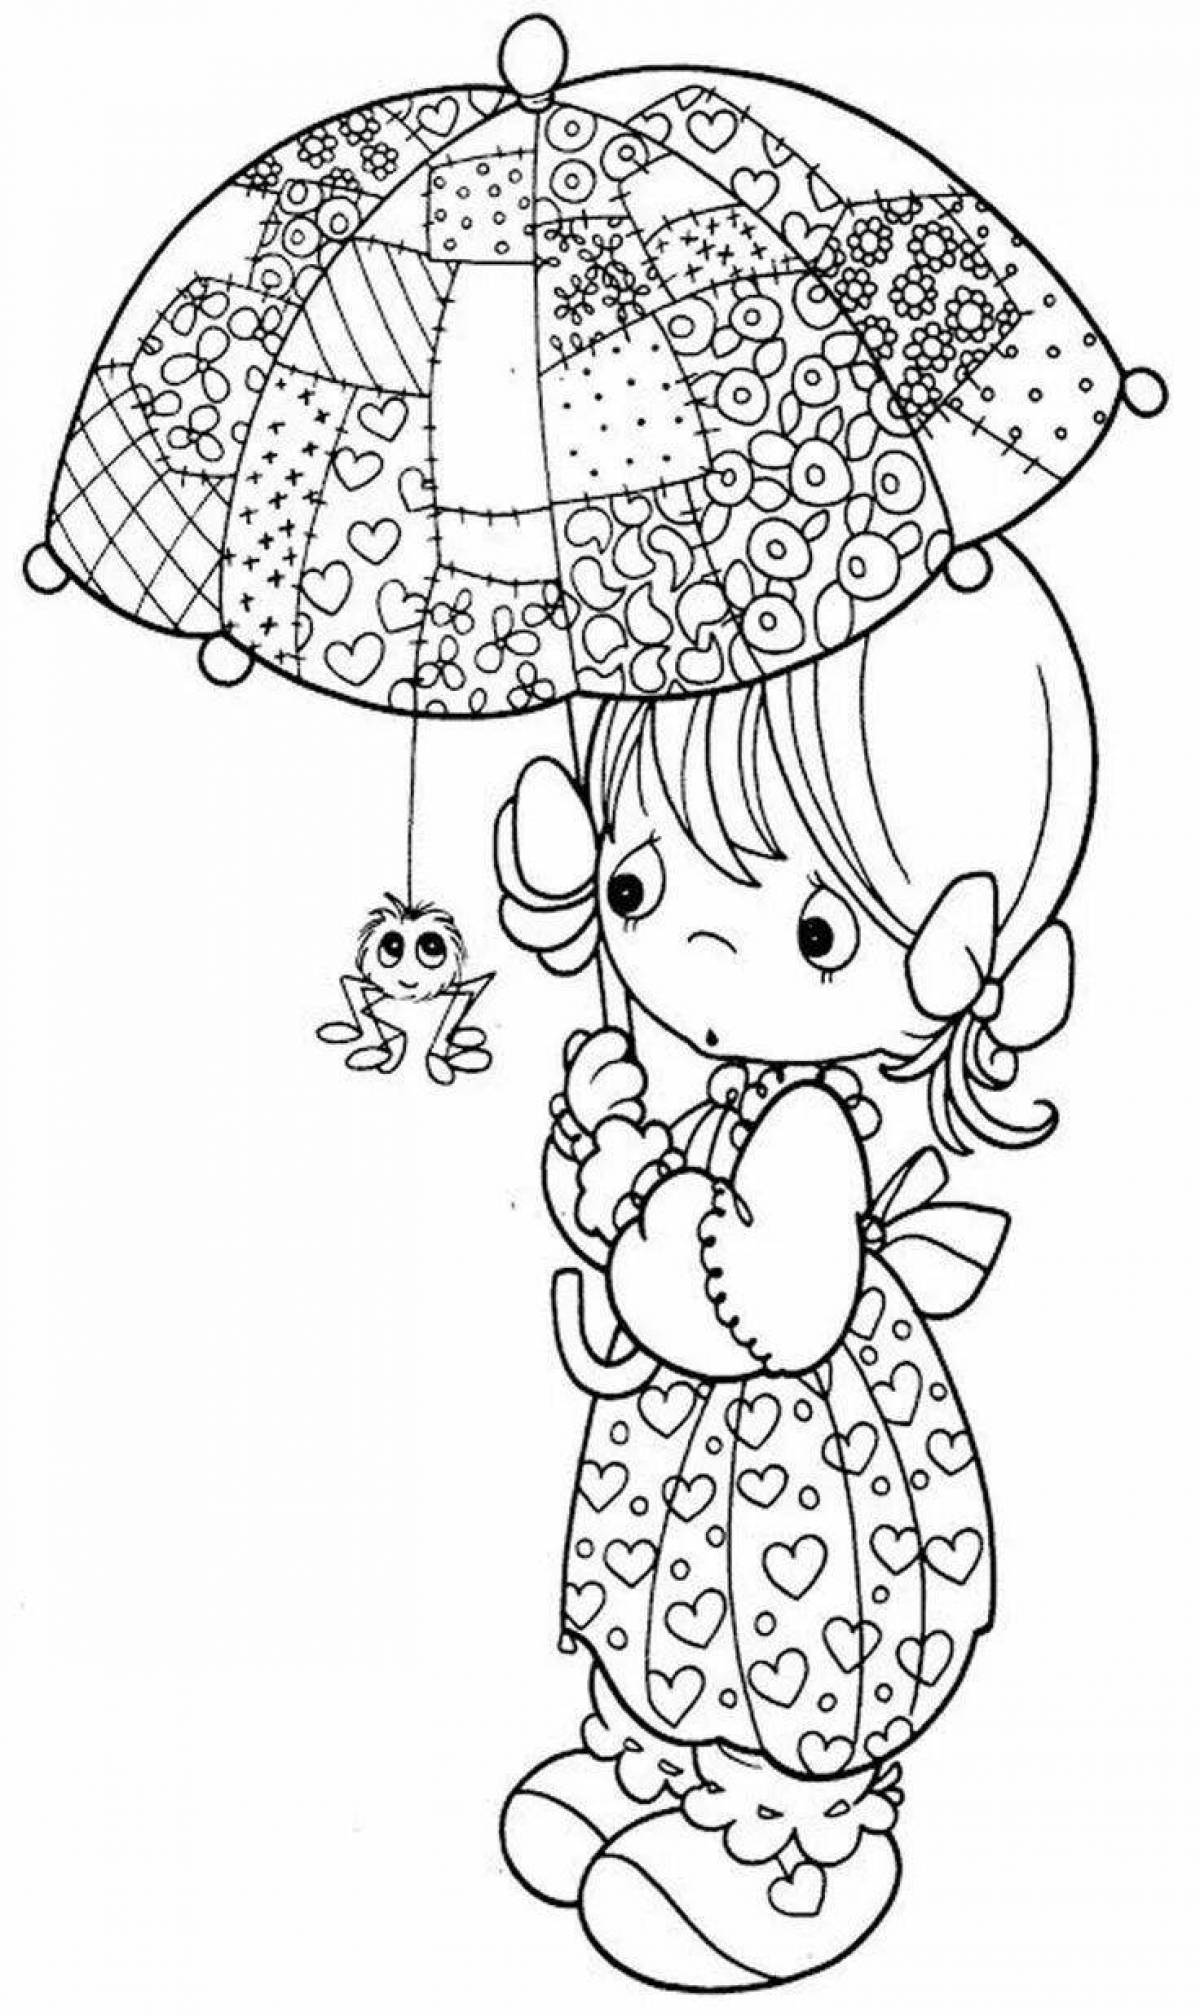 Incredible little coloring book for girls